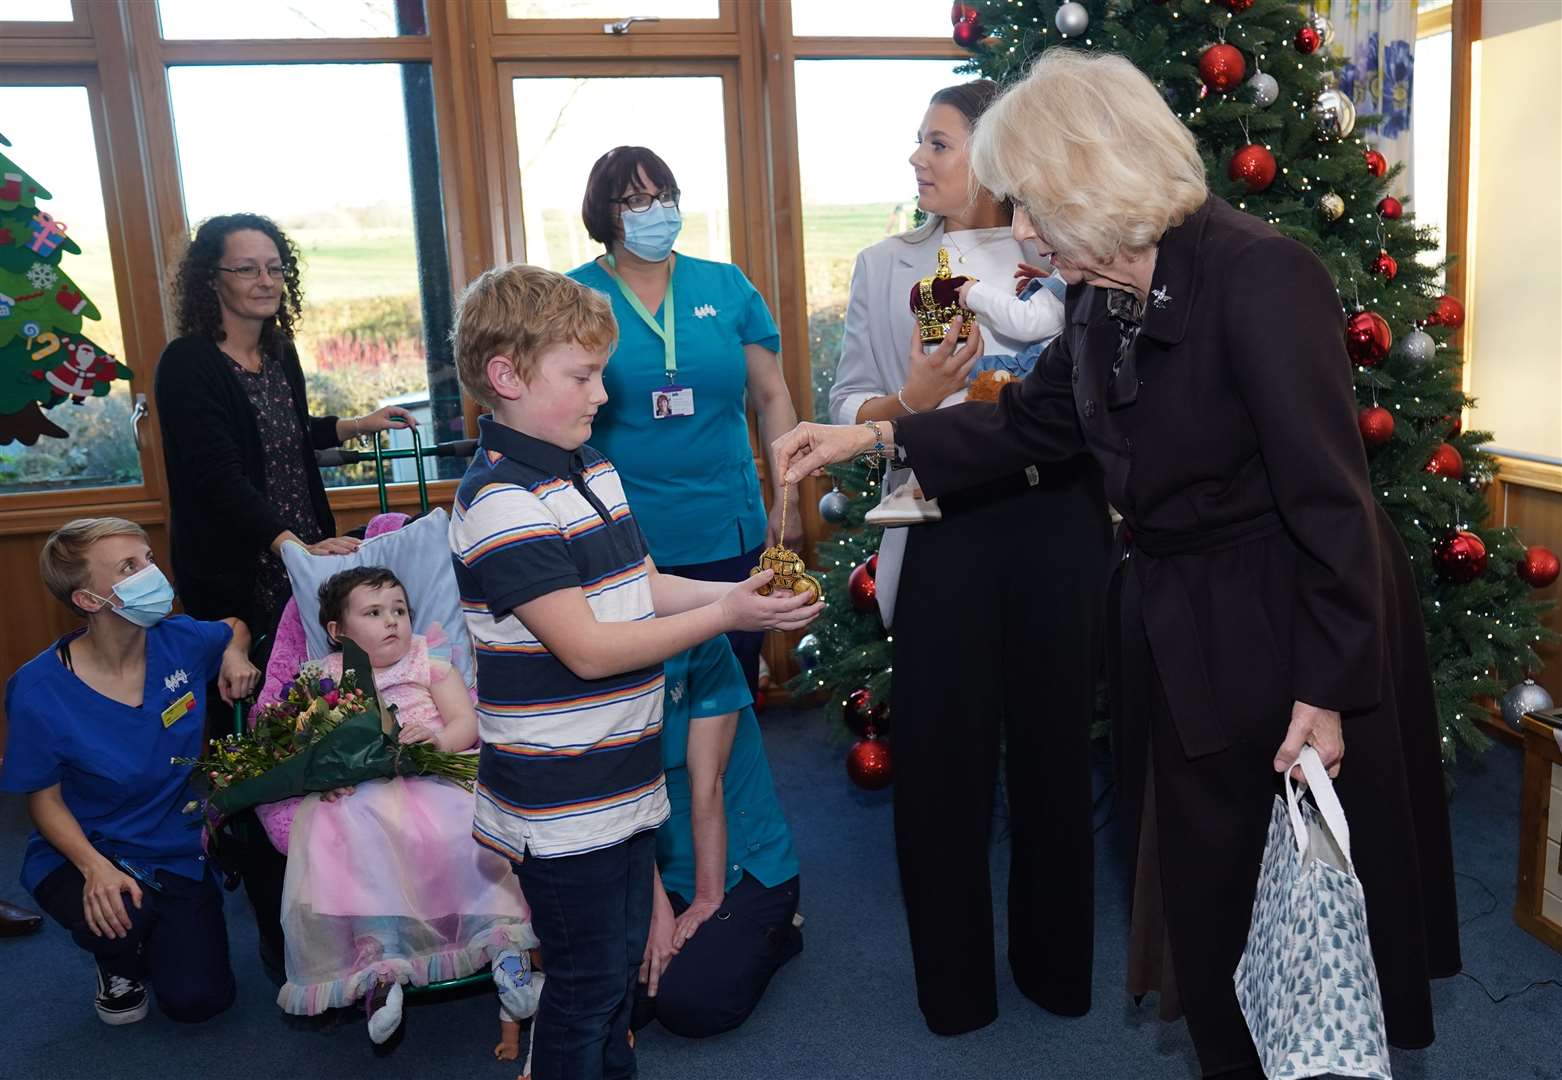 Camilla handing out tree decorations to families at the hospice (Jacob King/PA)